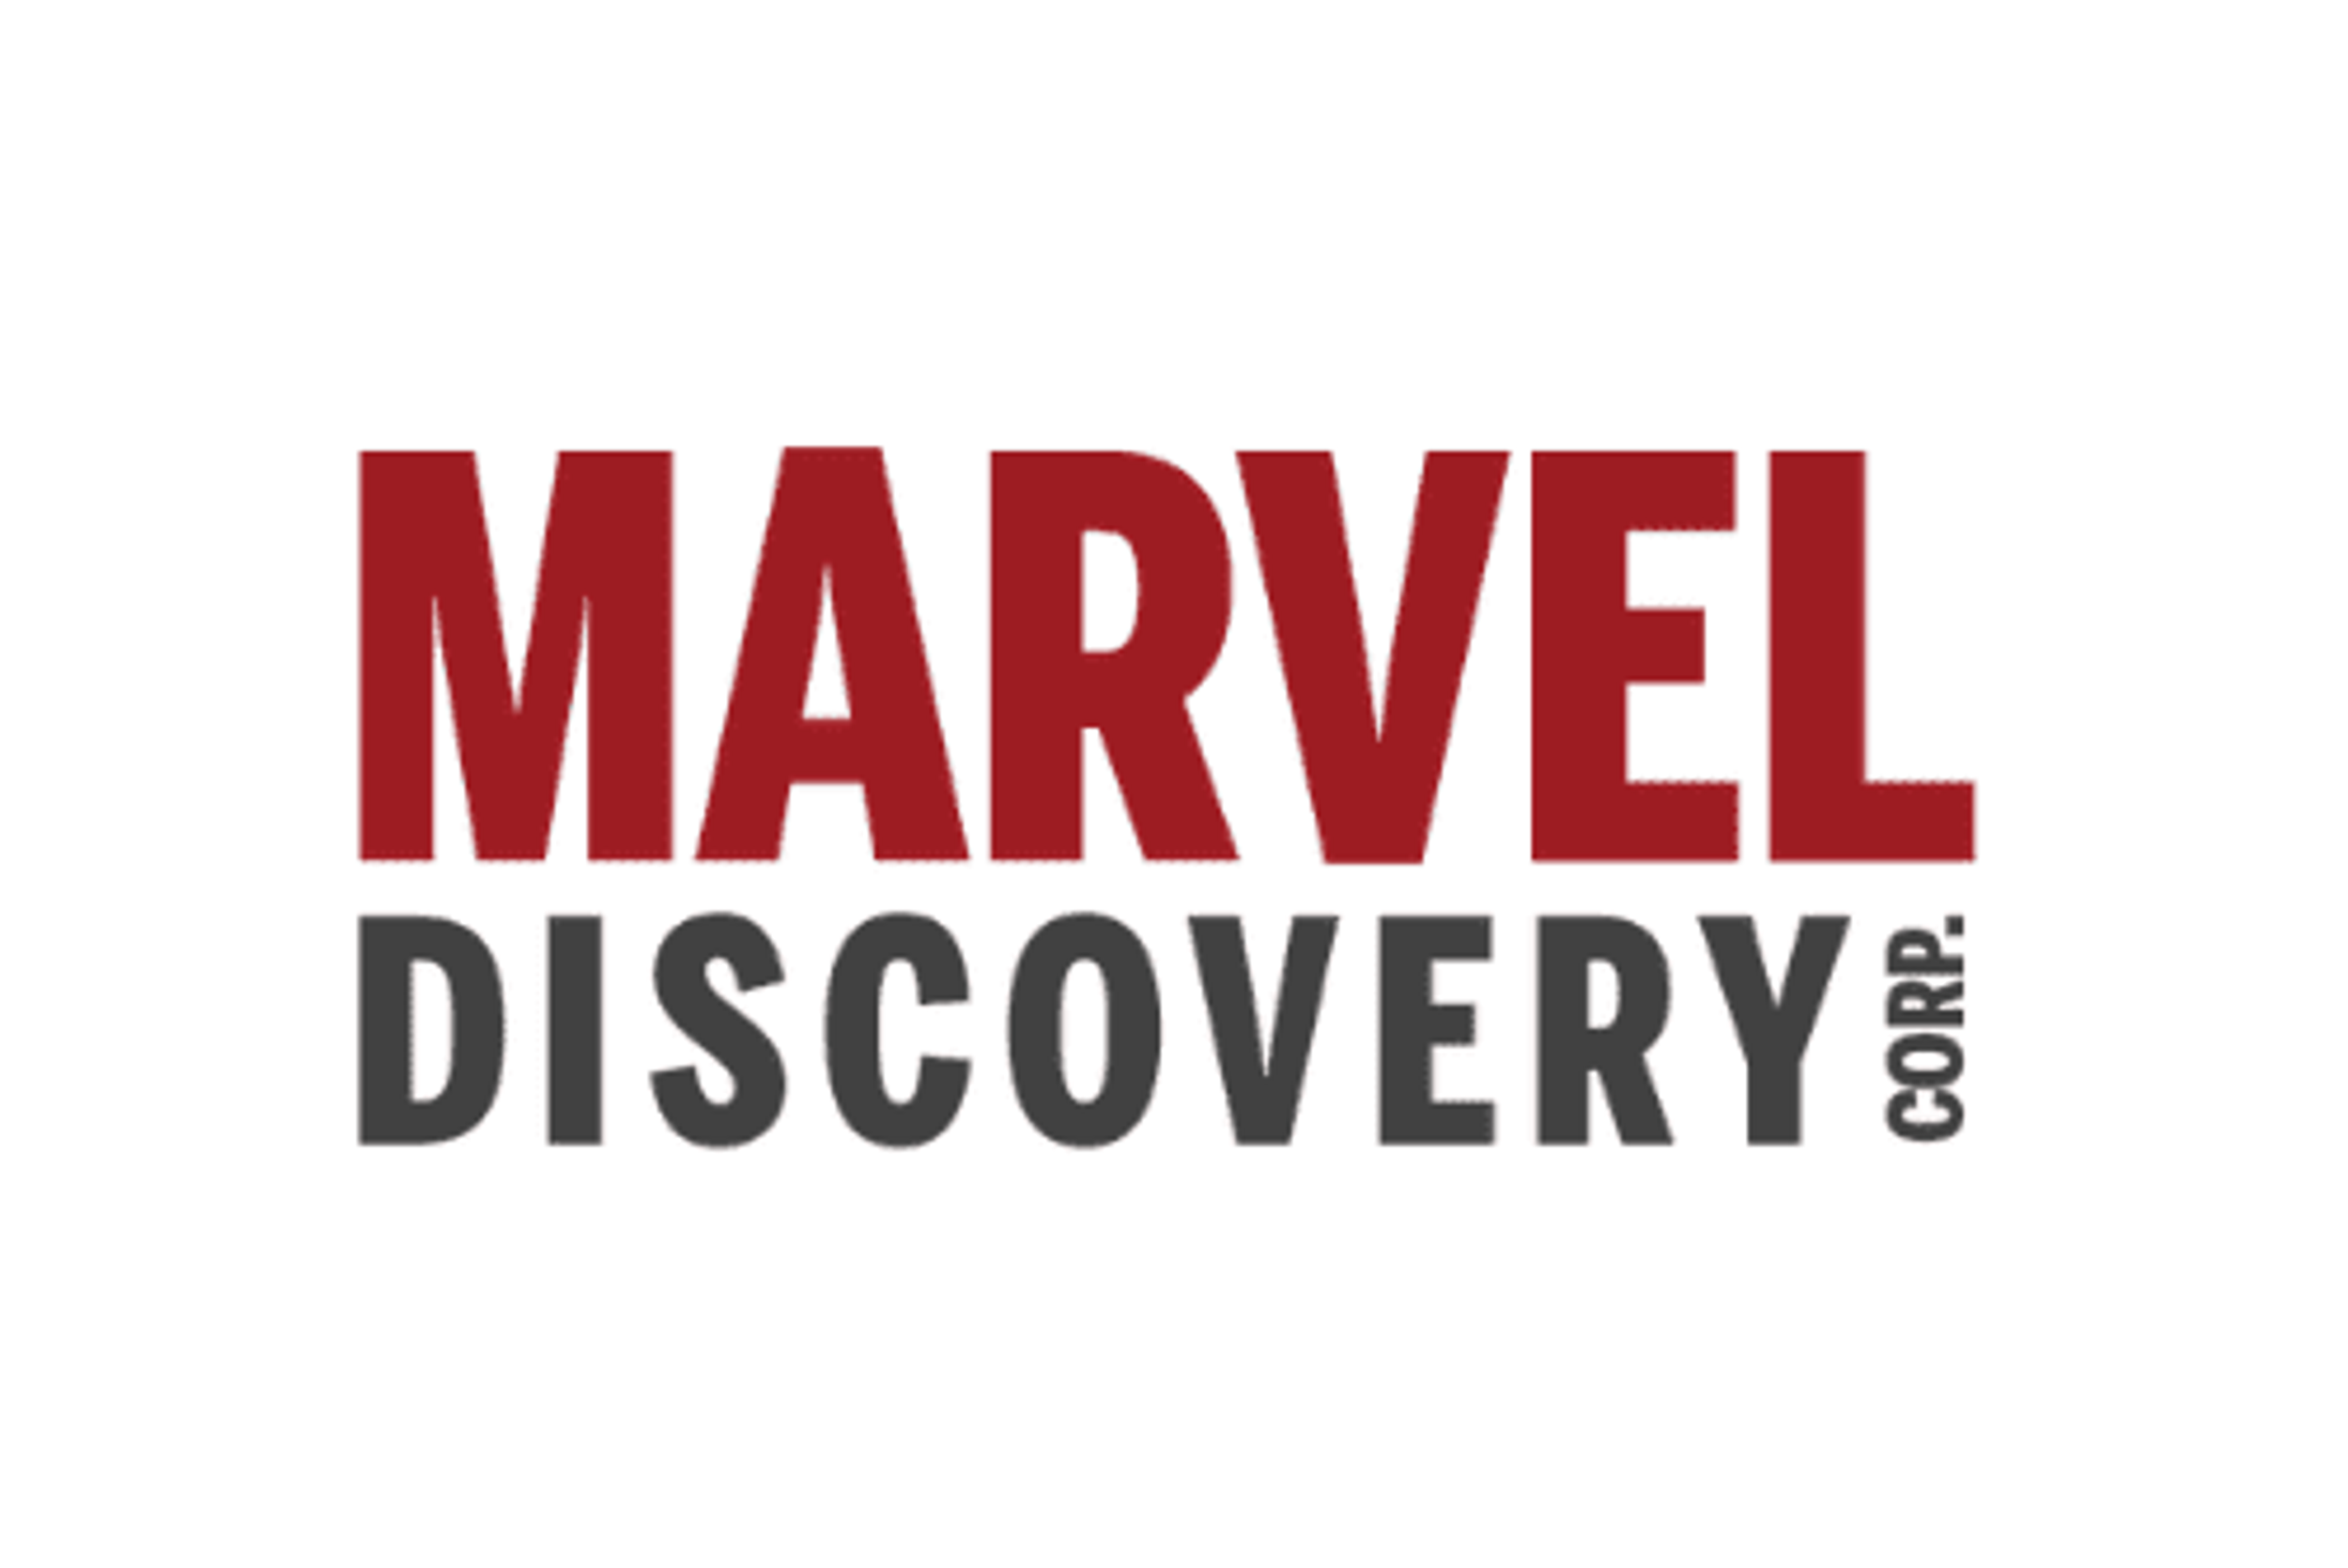 Marvel's SPINCO Power-One Resources, NI-PGE-REE's-Uranium Project, Moves Forward Finalizes Financing and Listing Process